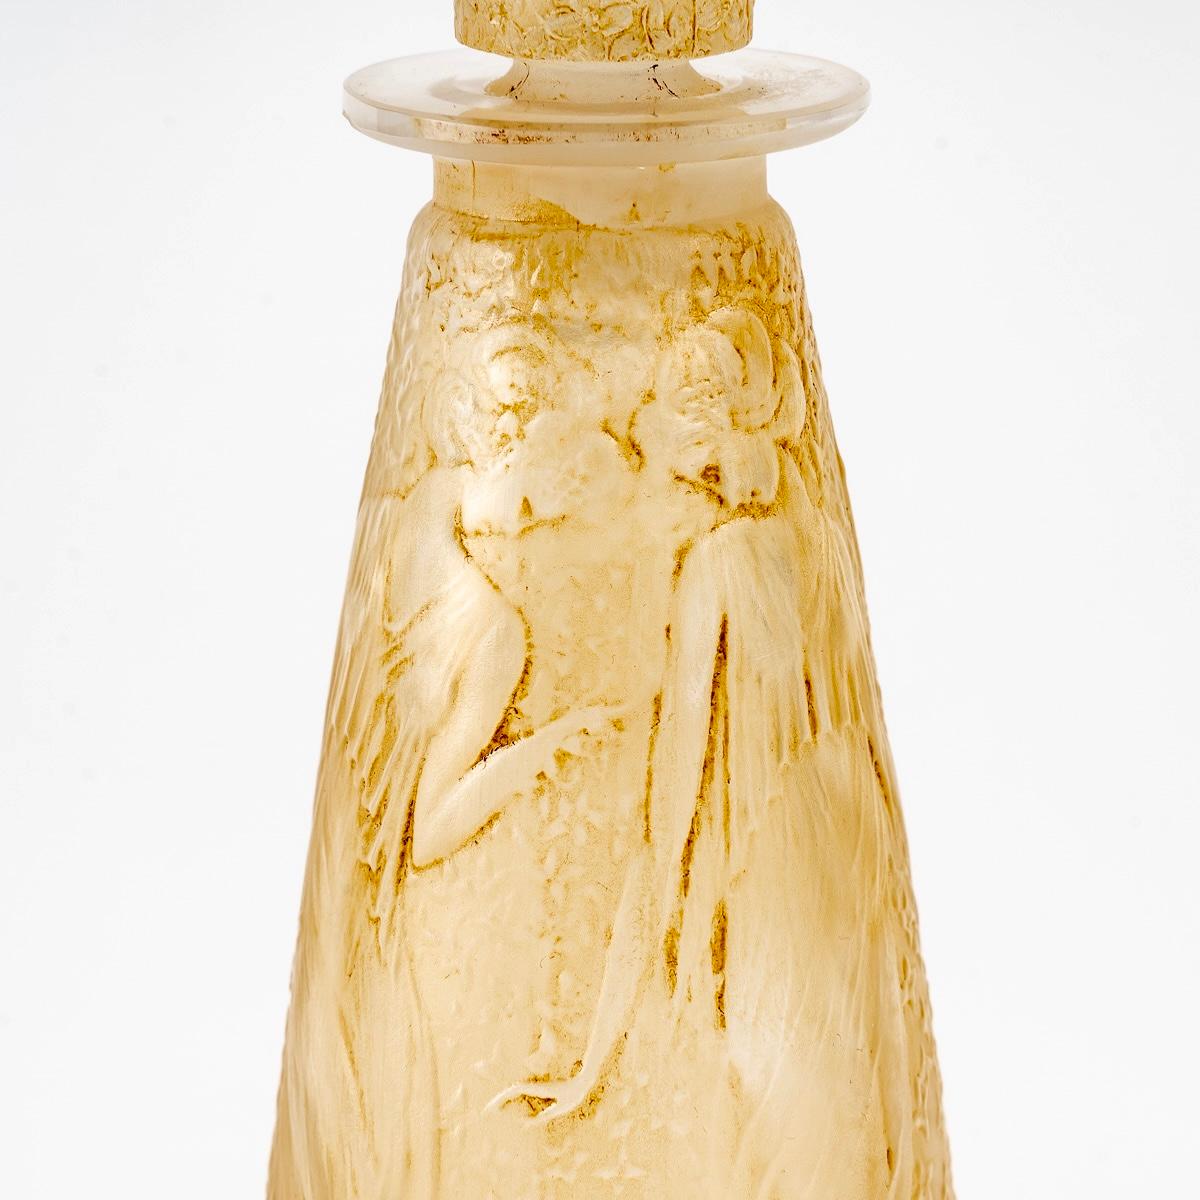 Art Deco 1914 René Lalique, Perfume Bottle Poesie Glass with Yellow Patina for D'orsay For Sale